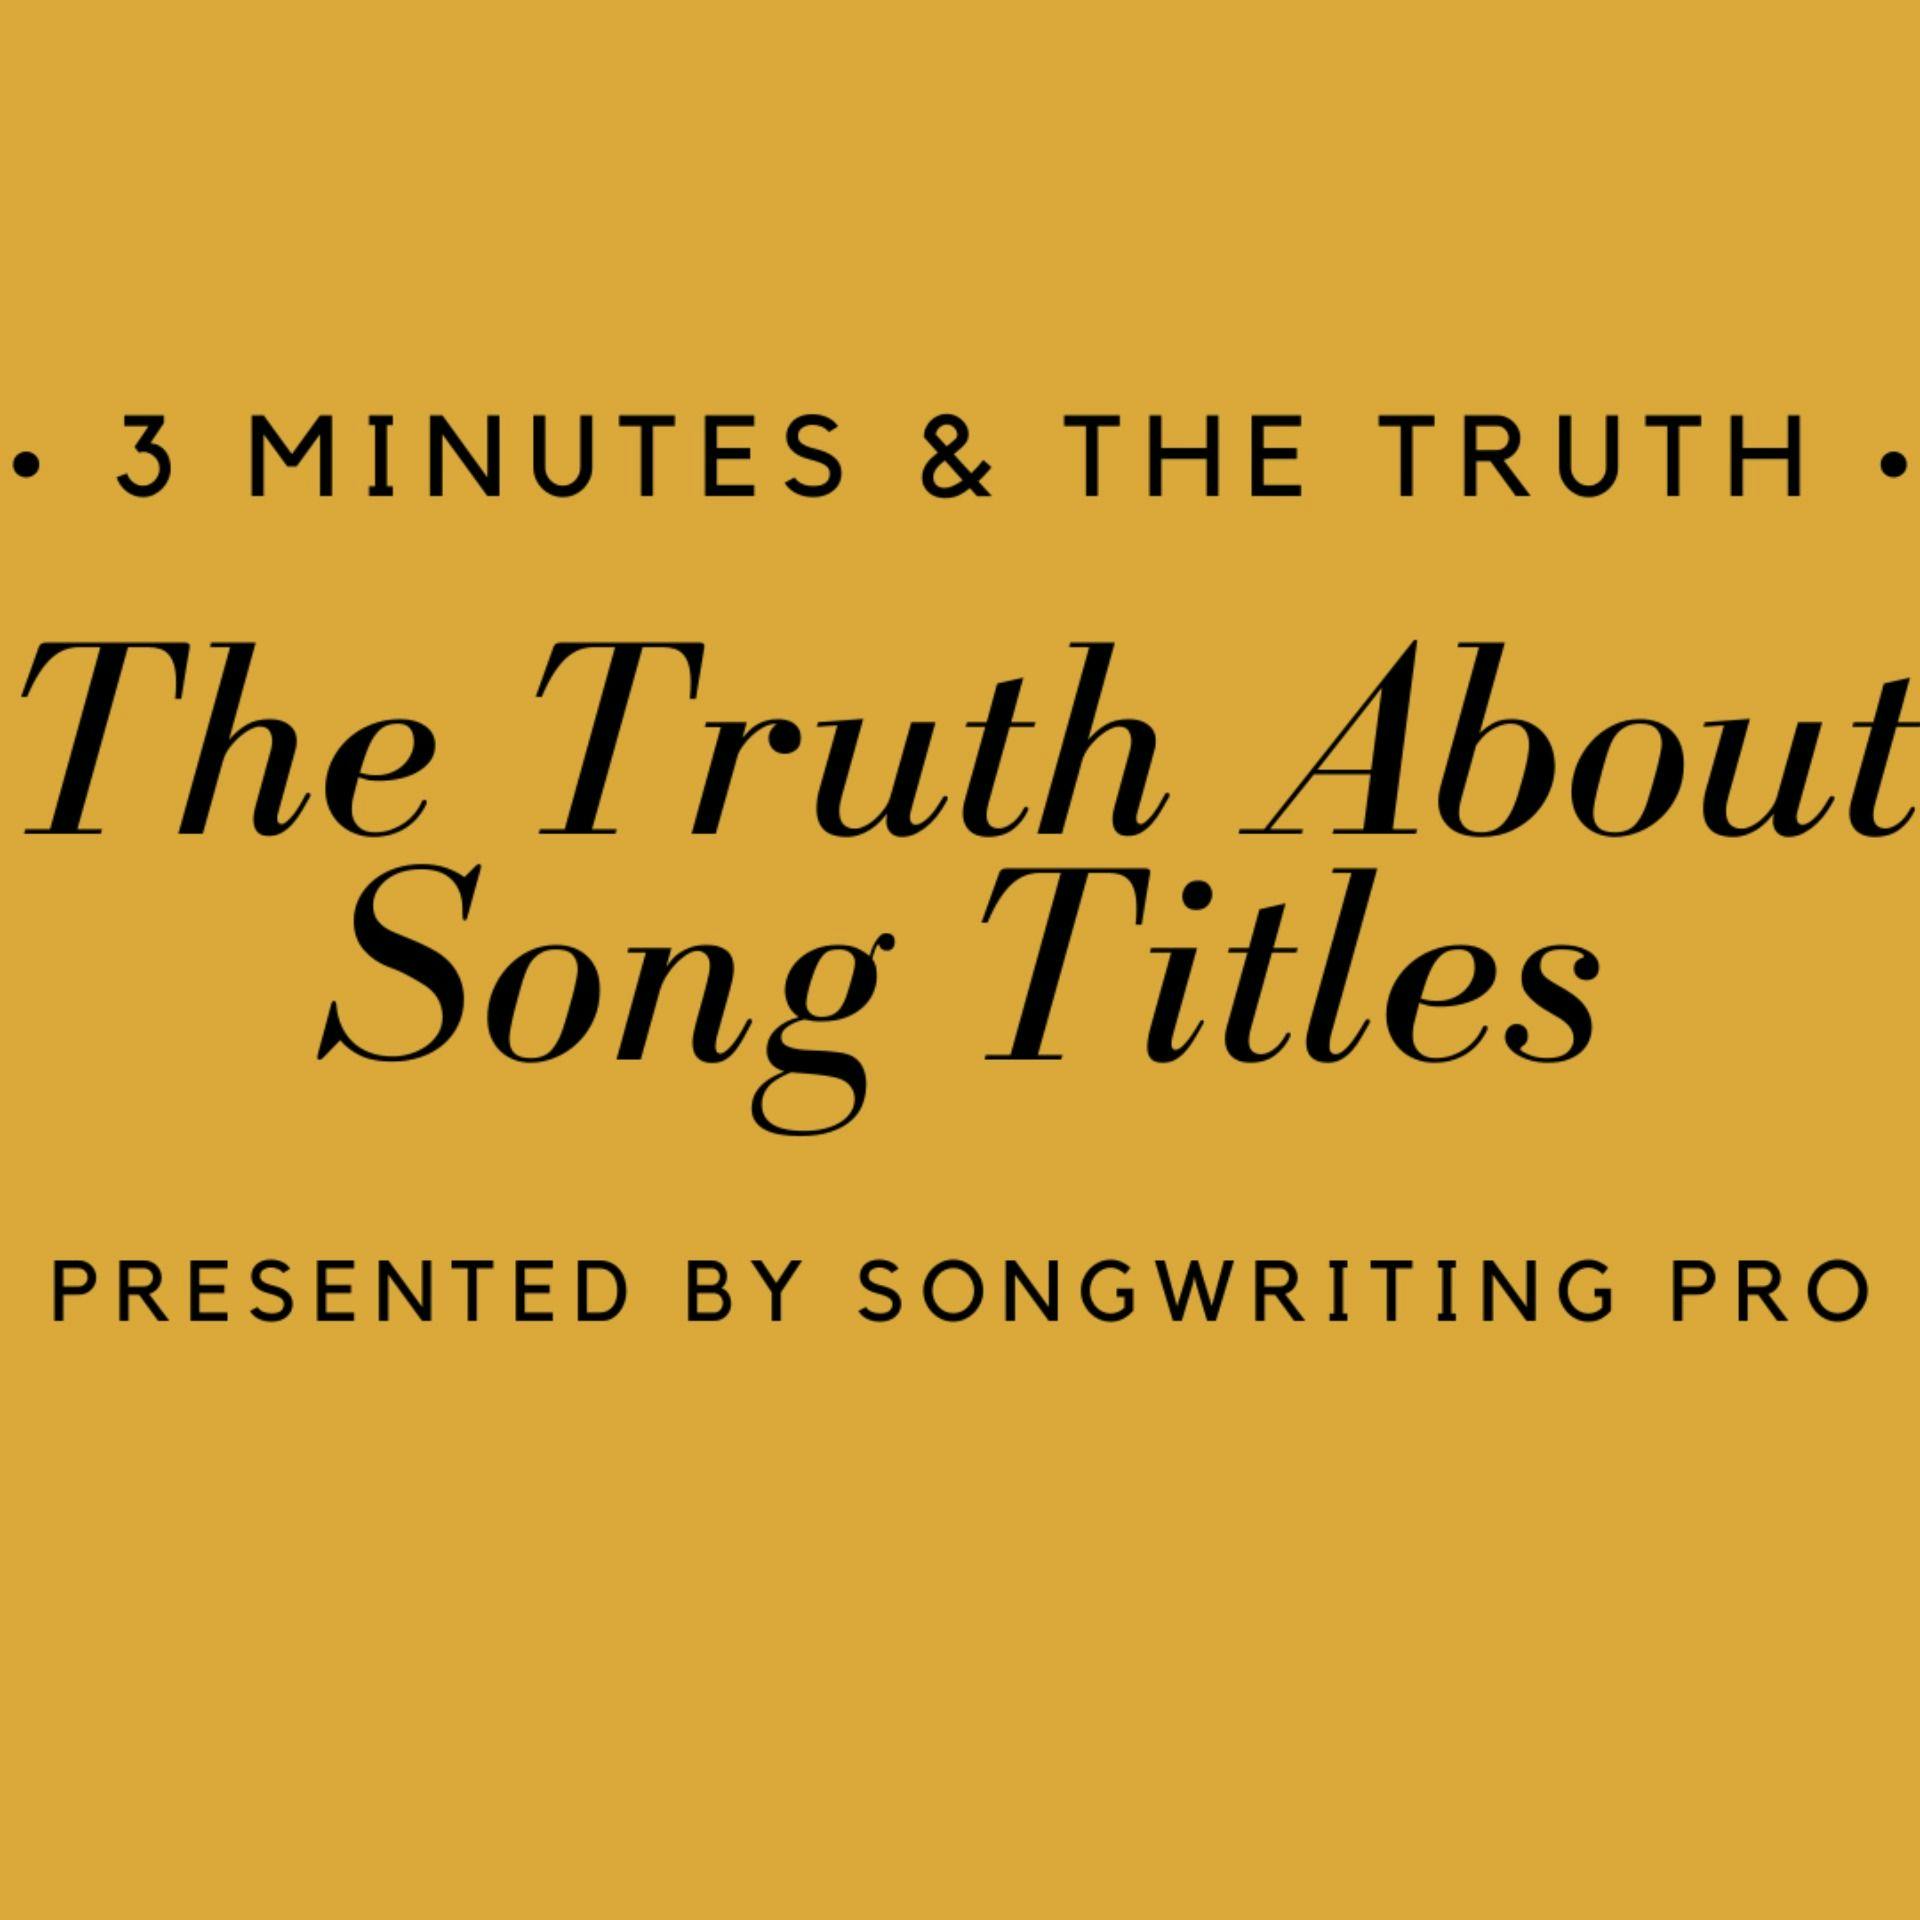 3 Minutes & The Truth: Song Titles